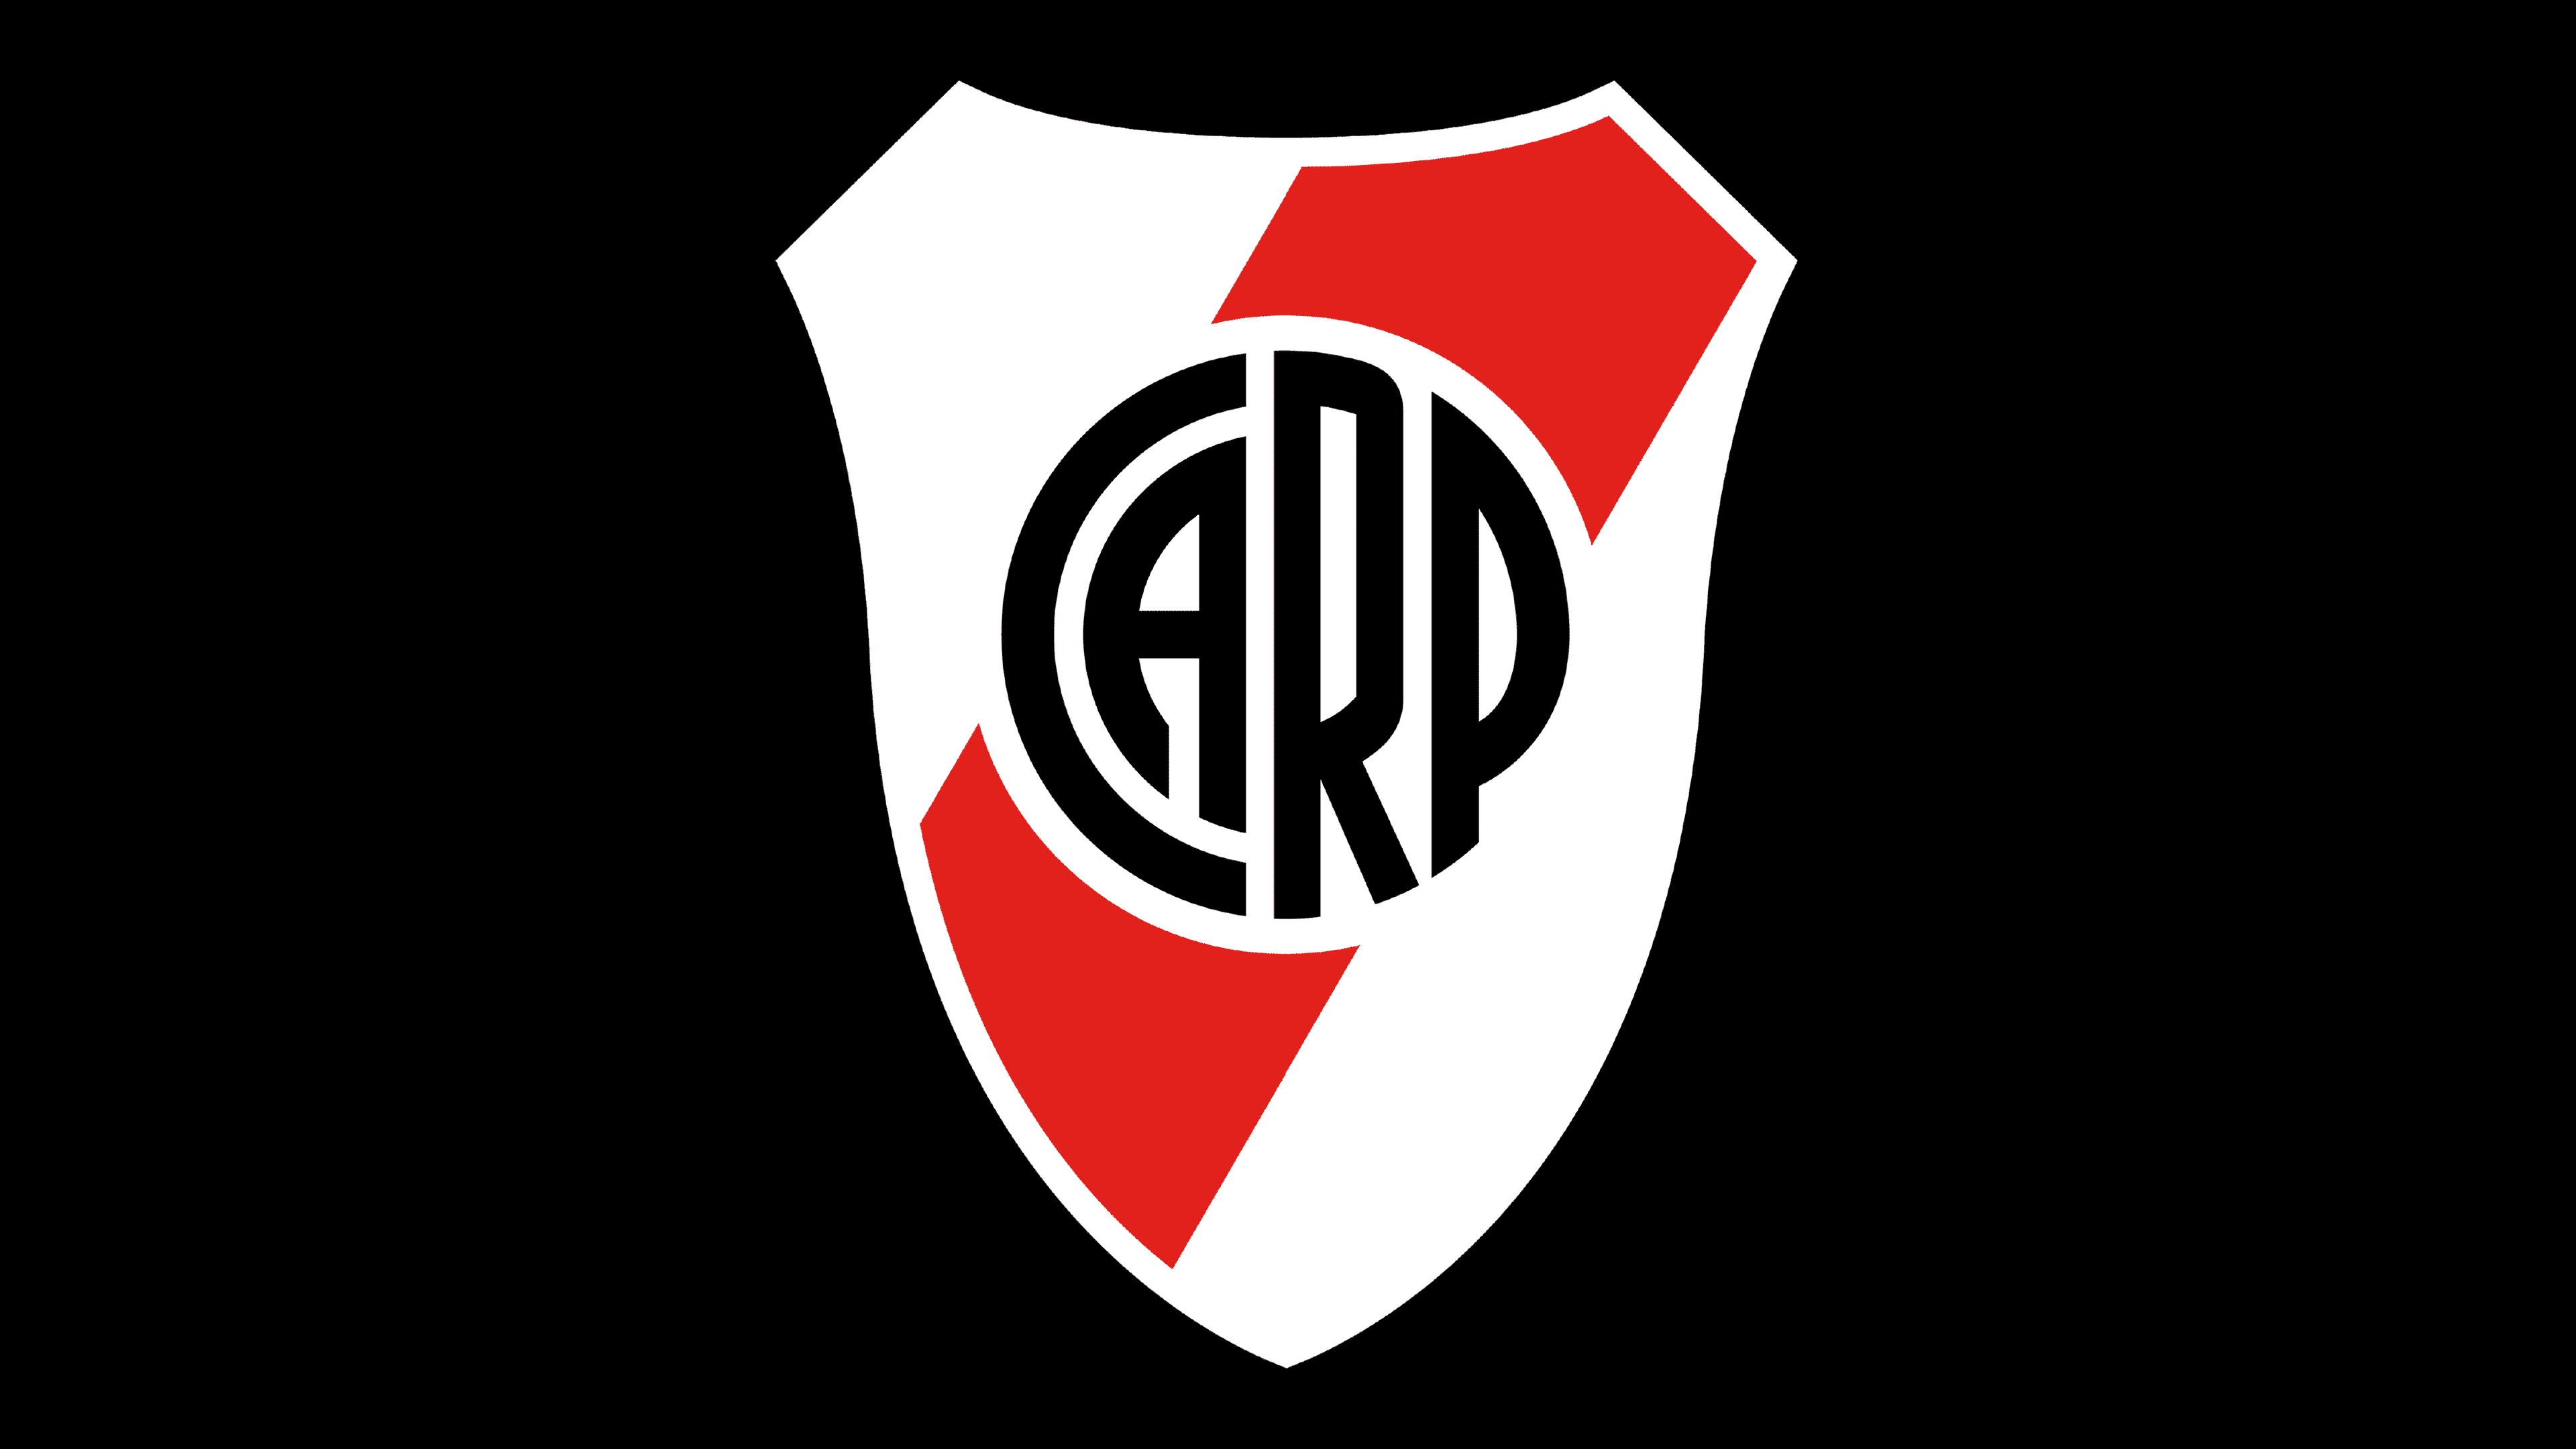 The history of Atlético River Plate is reflected in the club's new identity